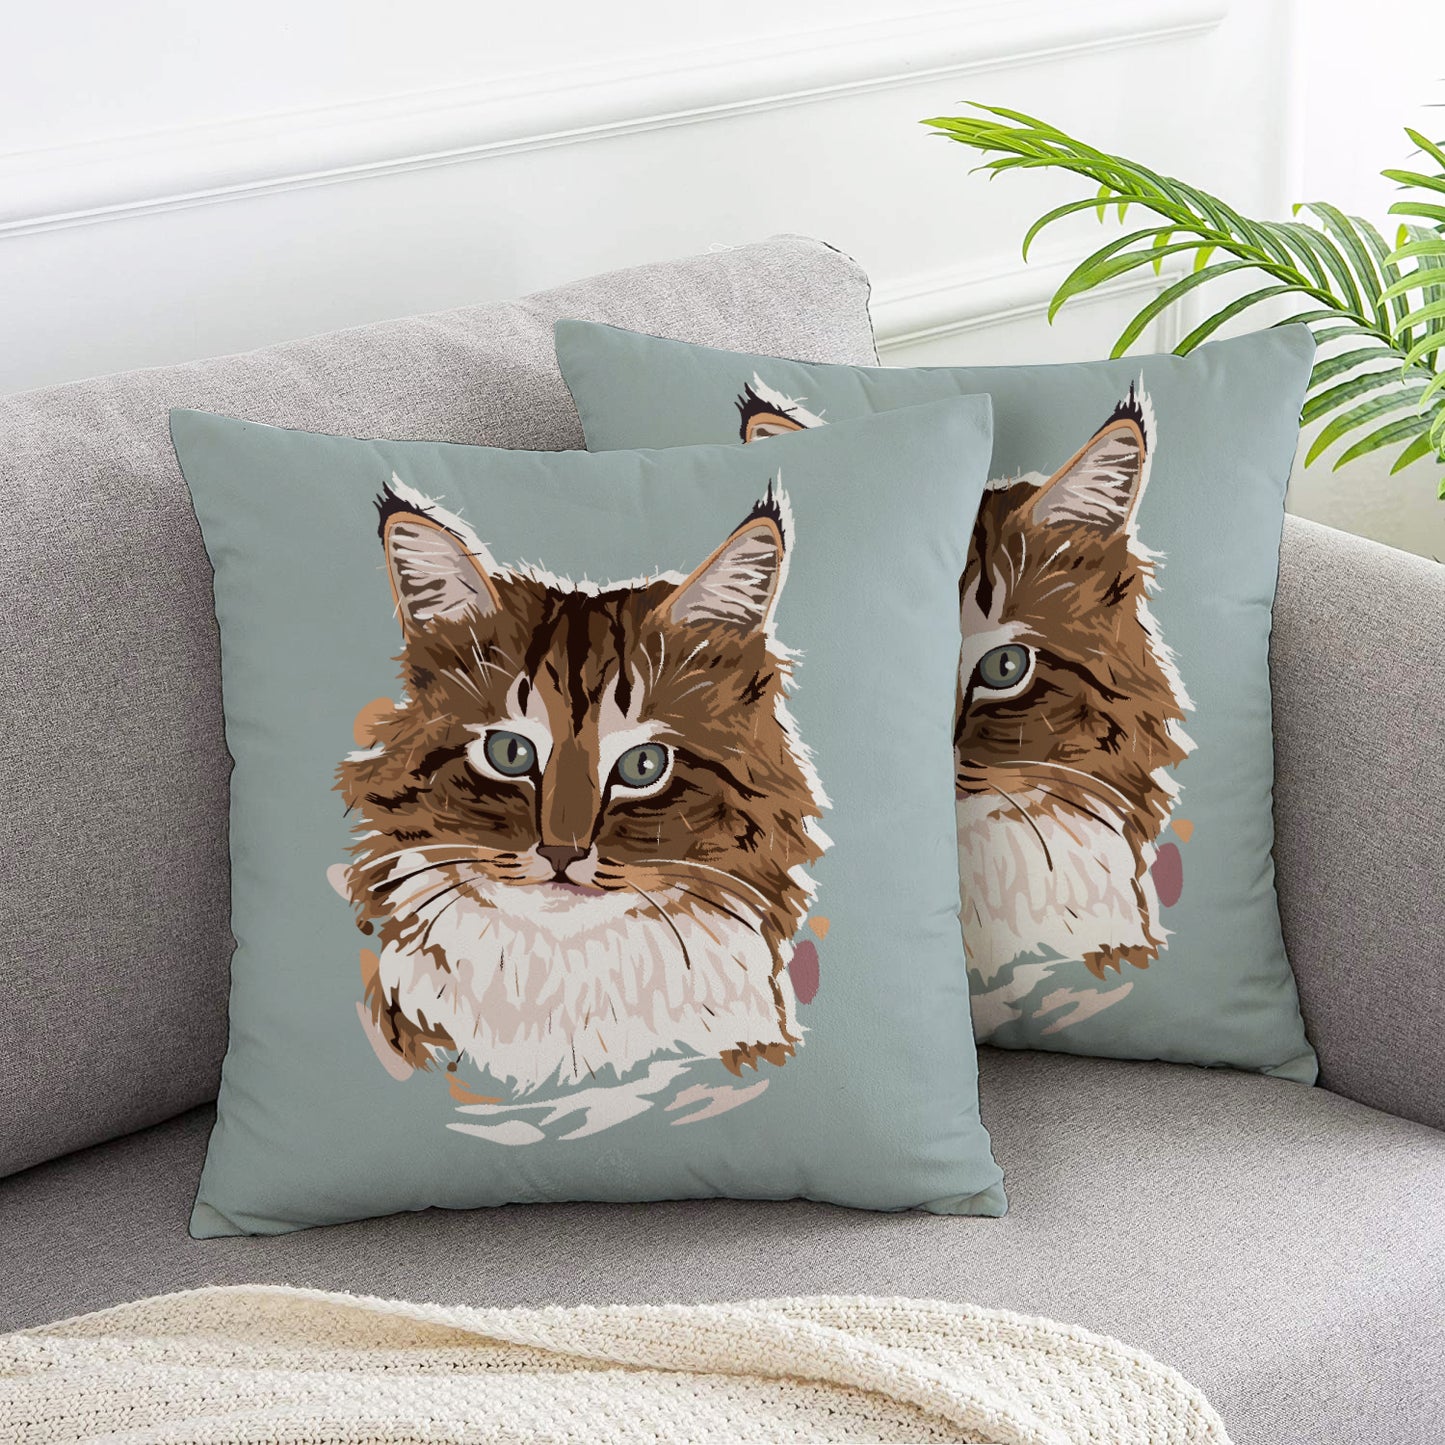 Maine Cat Throw Pillow Cushion Covers